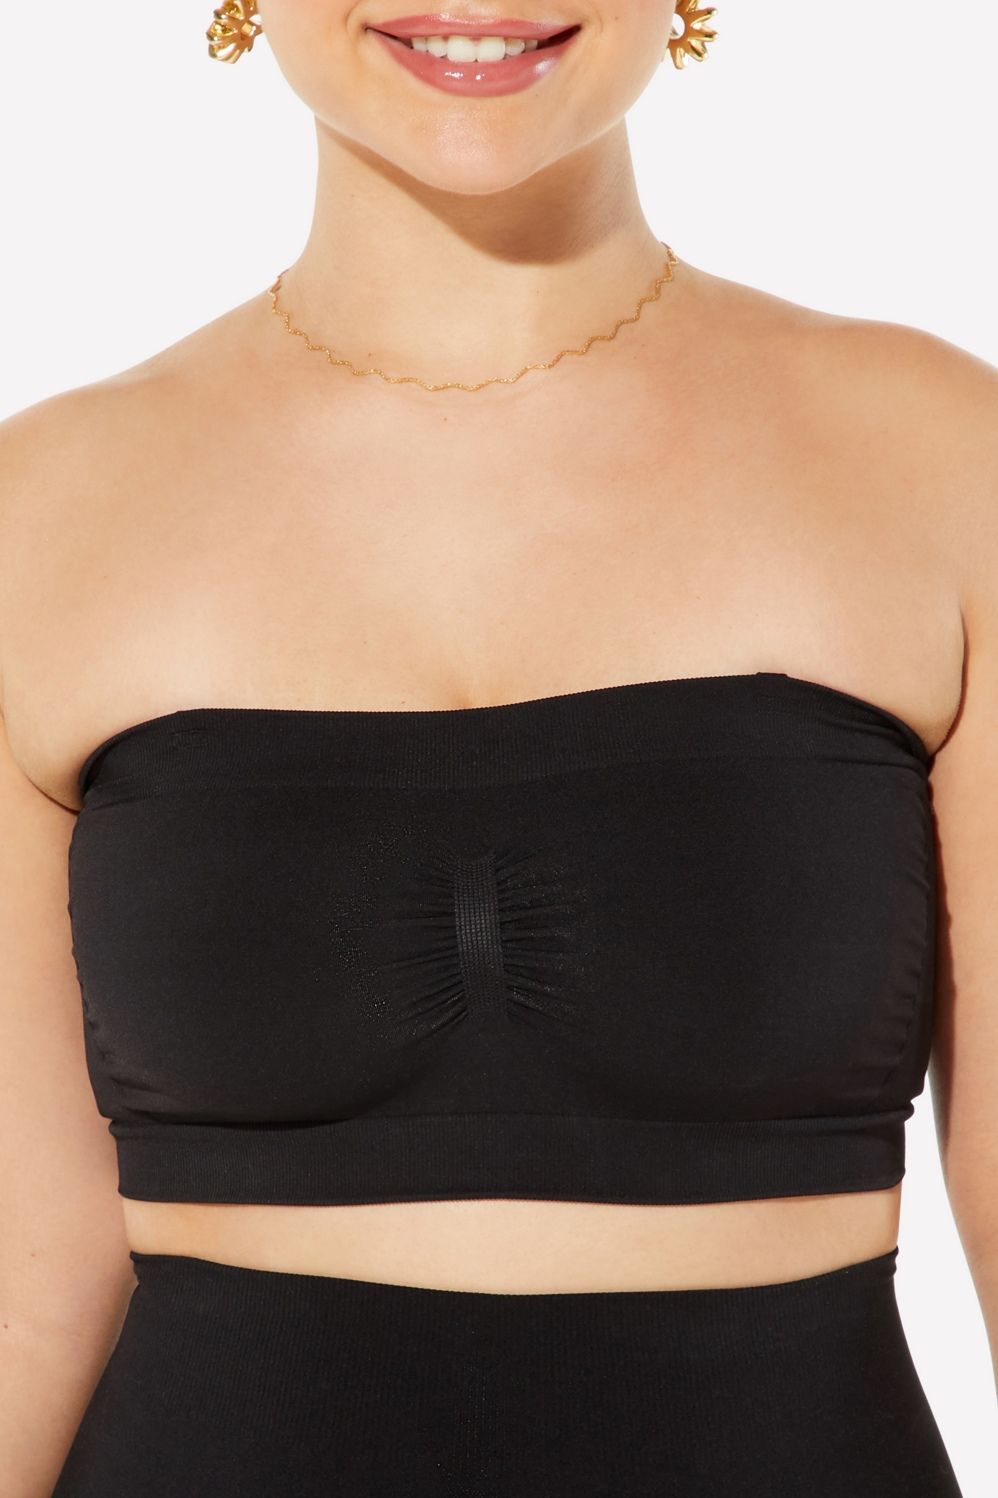 Nearly Naked Shaping Bandeau | Fabletics - North America